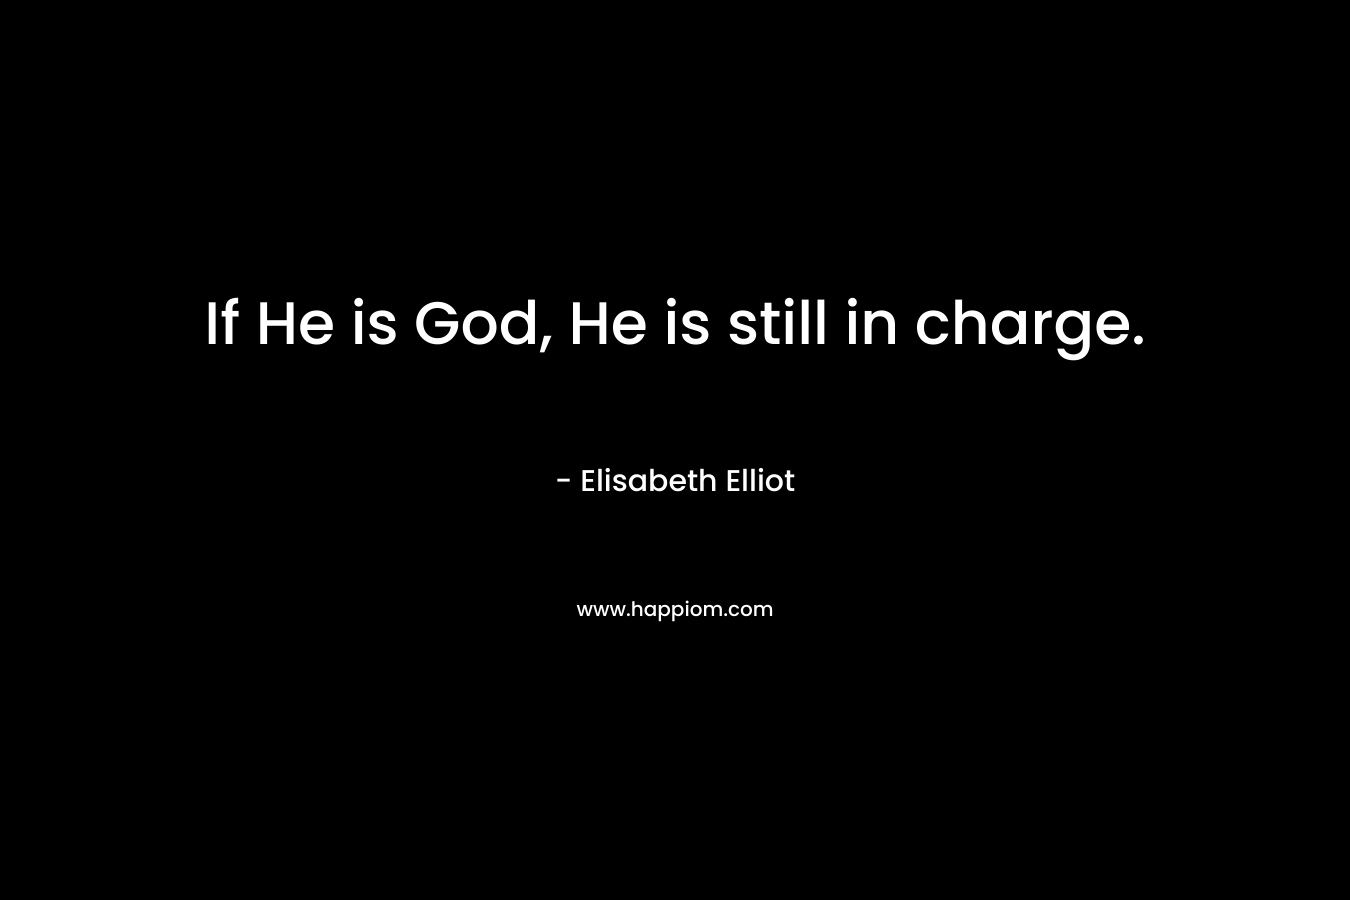 If He is God, He is still in charge.